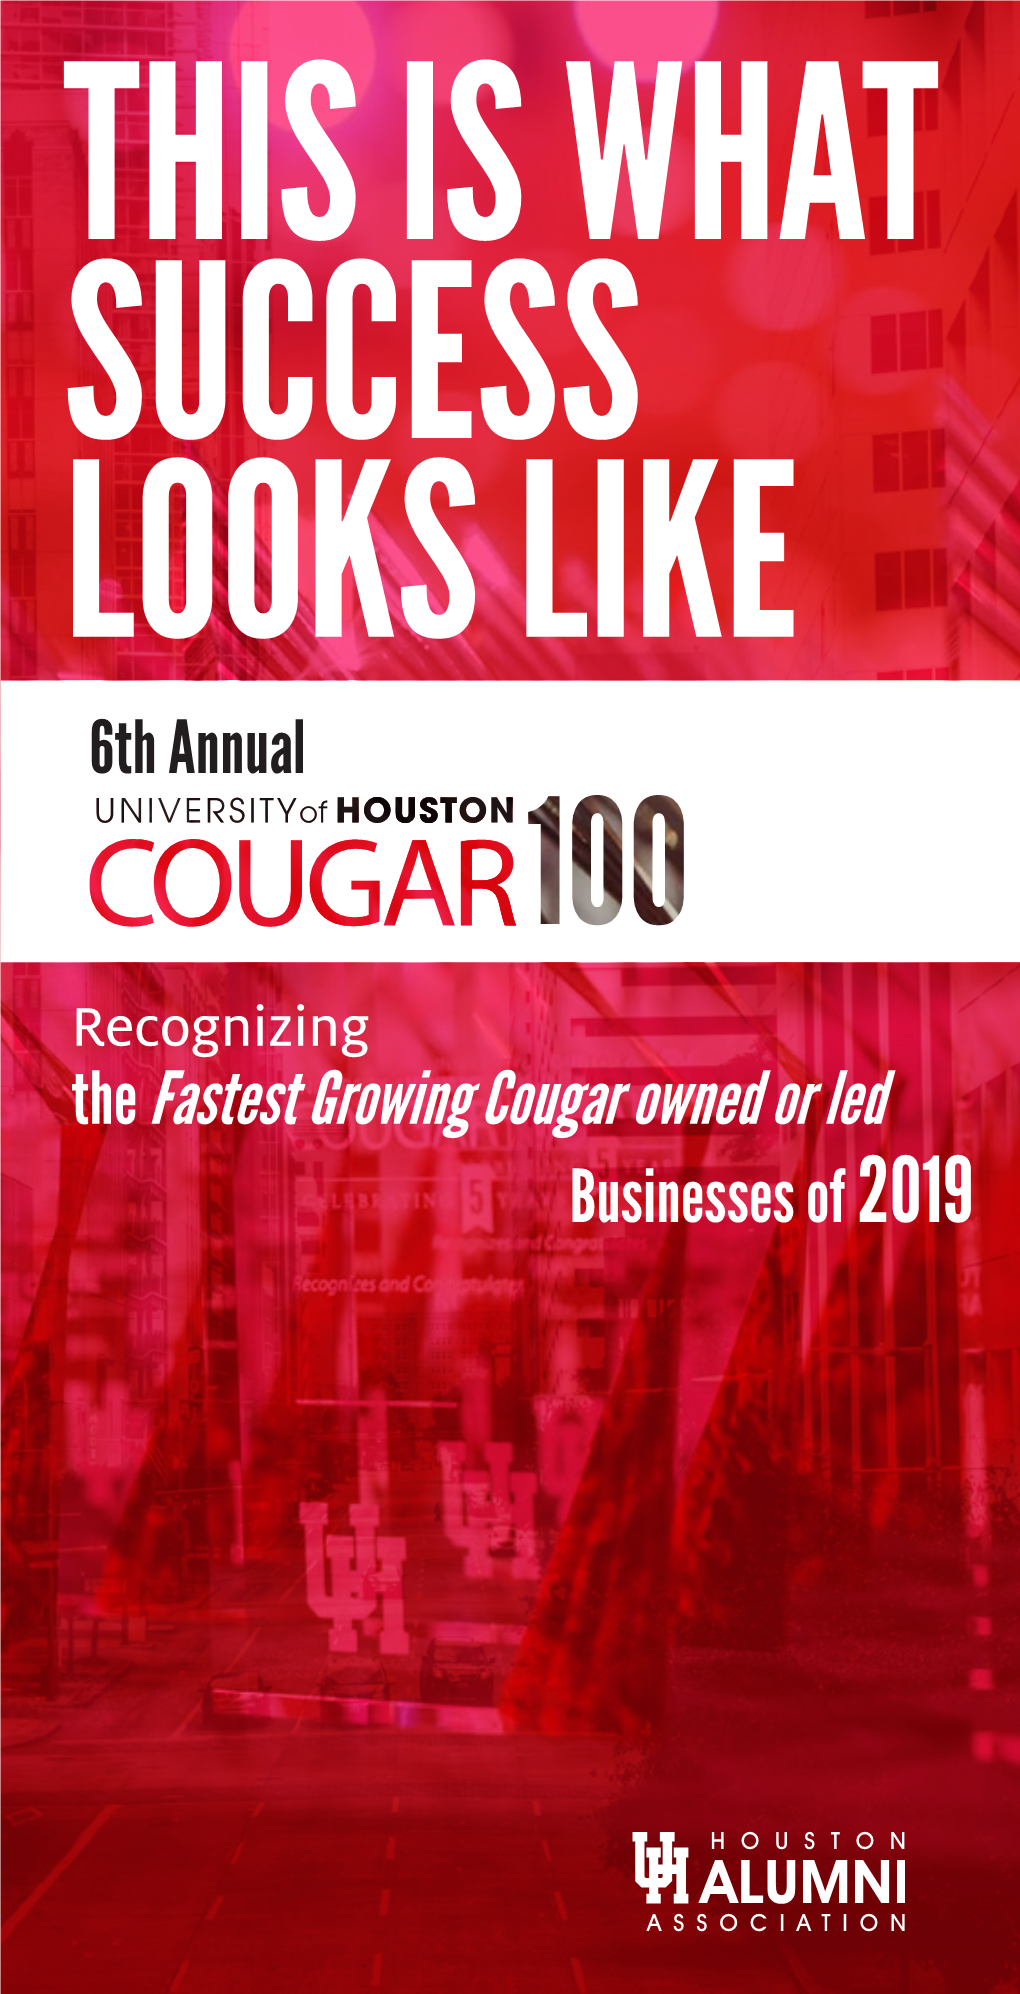 The Fastest Growing Cougar Owned Or Led Businesses of 2019 About the Cougar 100